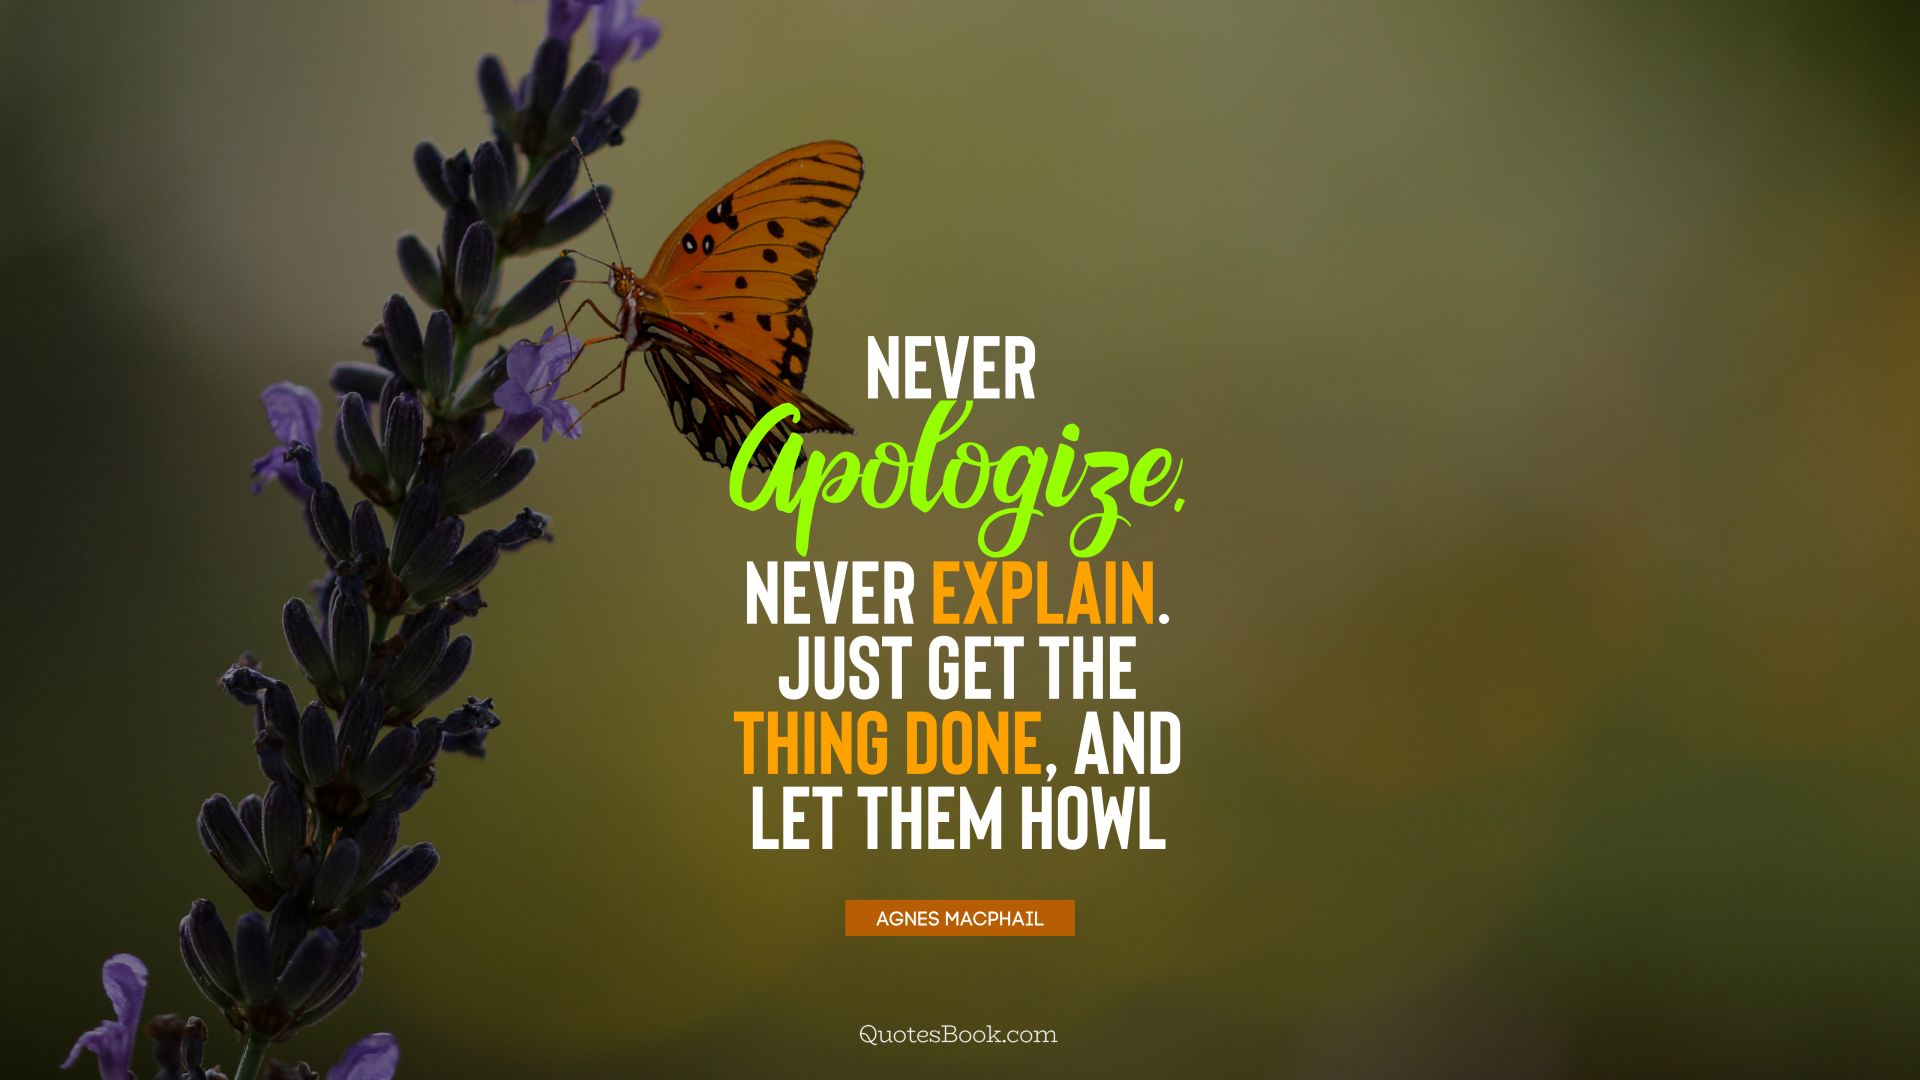 Never apologize. Never explain. Just get the thing done, and let them howl. - Quote by Agnes Macphail